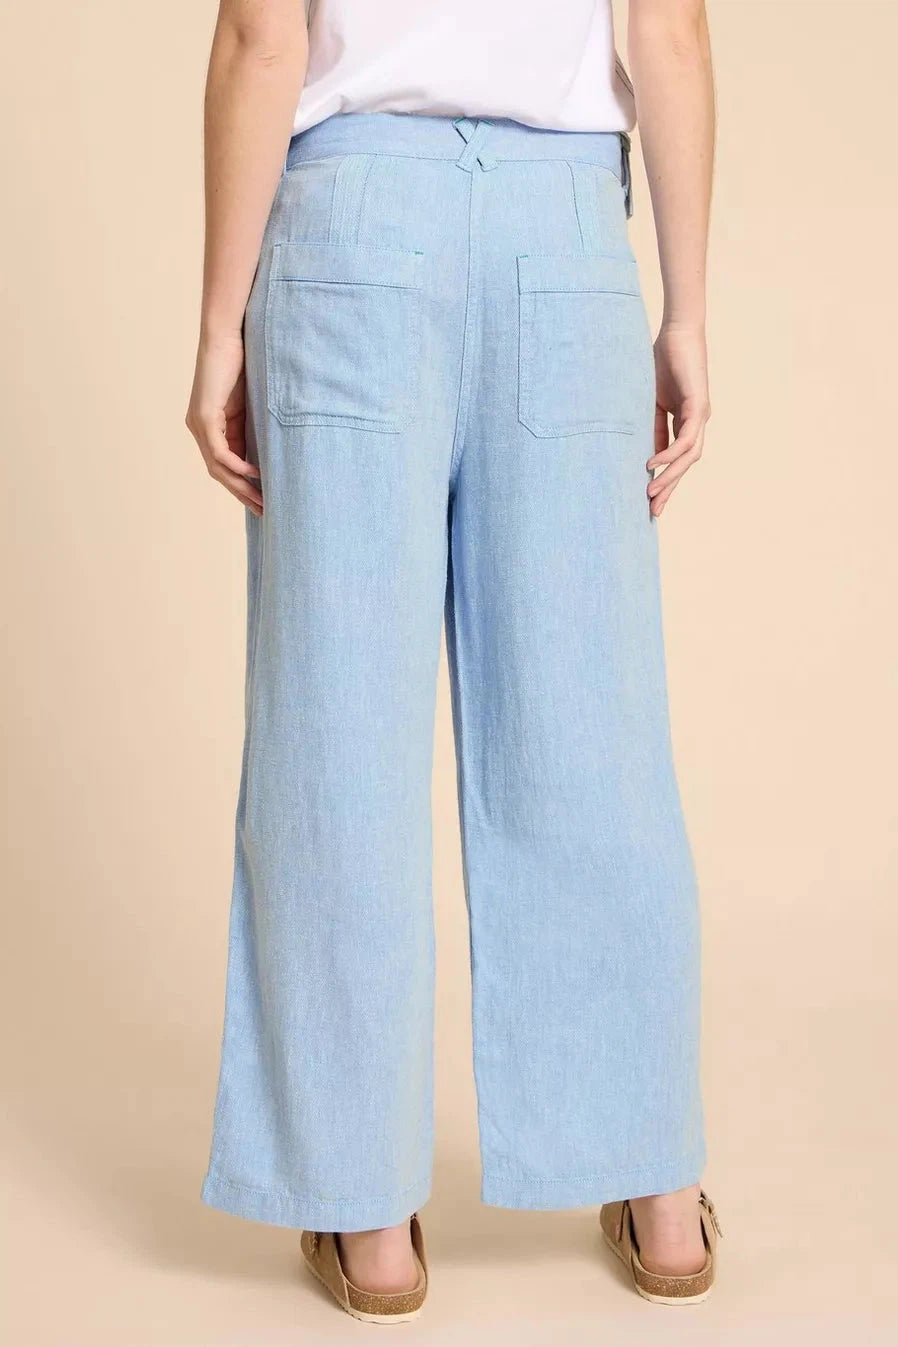 White Stuff Harper Linen Blend Trouser in Chambray Blue-Womens-Ohh! By Gum - Shop Sustainable